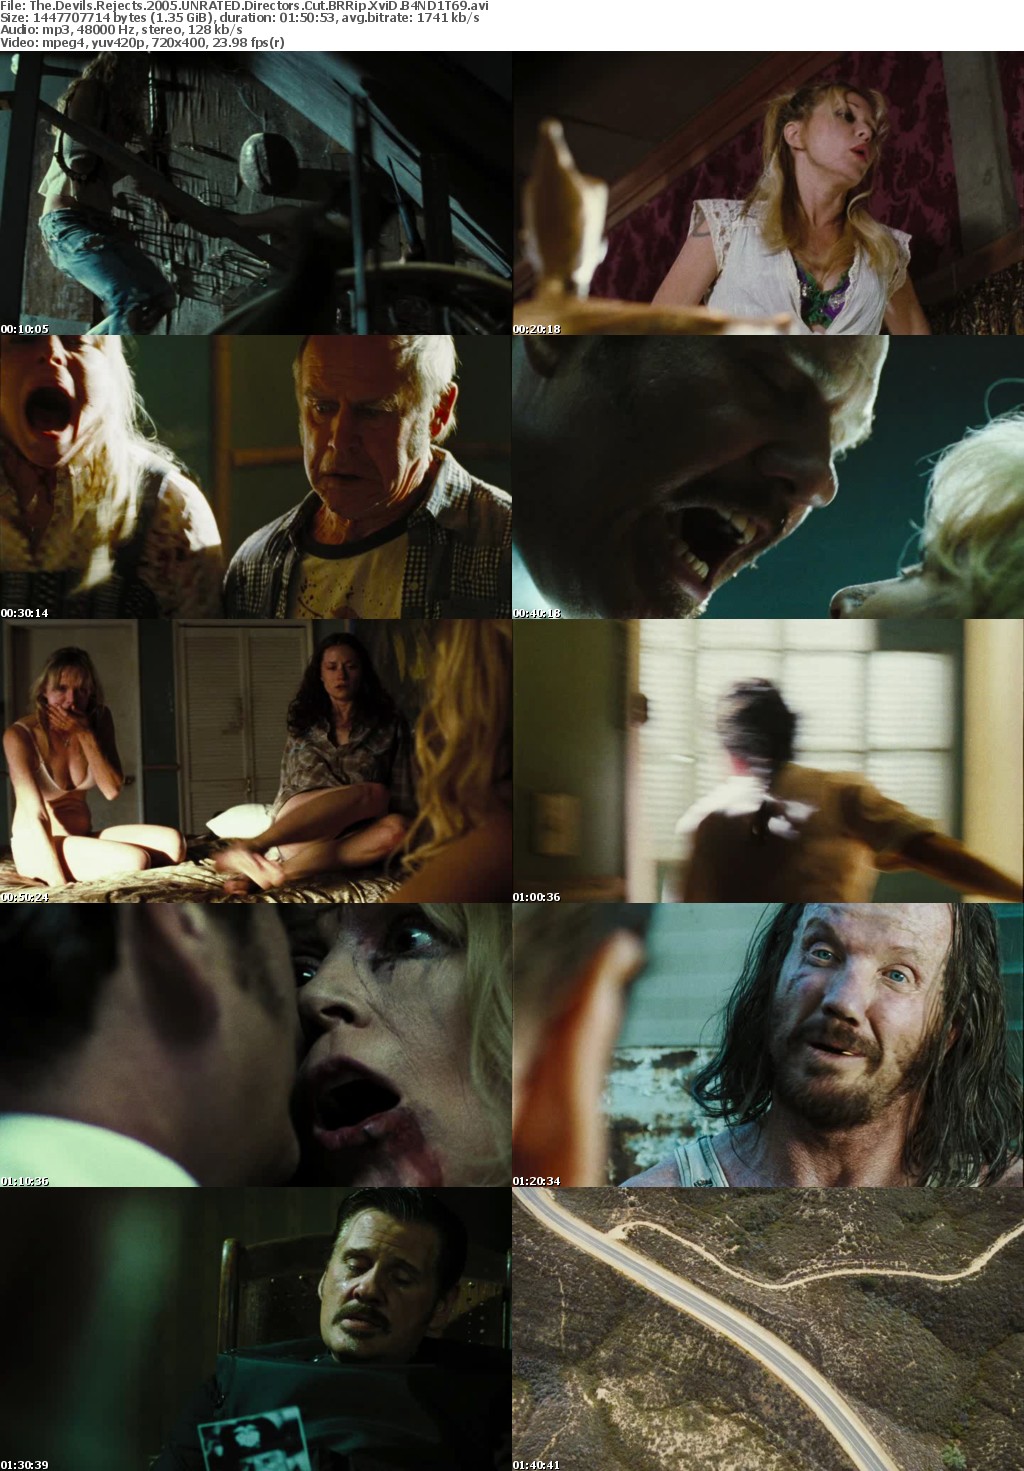 The Devils Rejects (2005) UNRATED Directors Cut BRRip XviD B4ND1T69